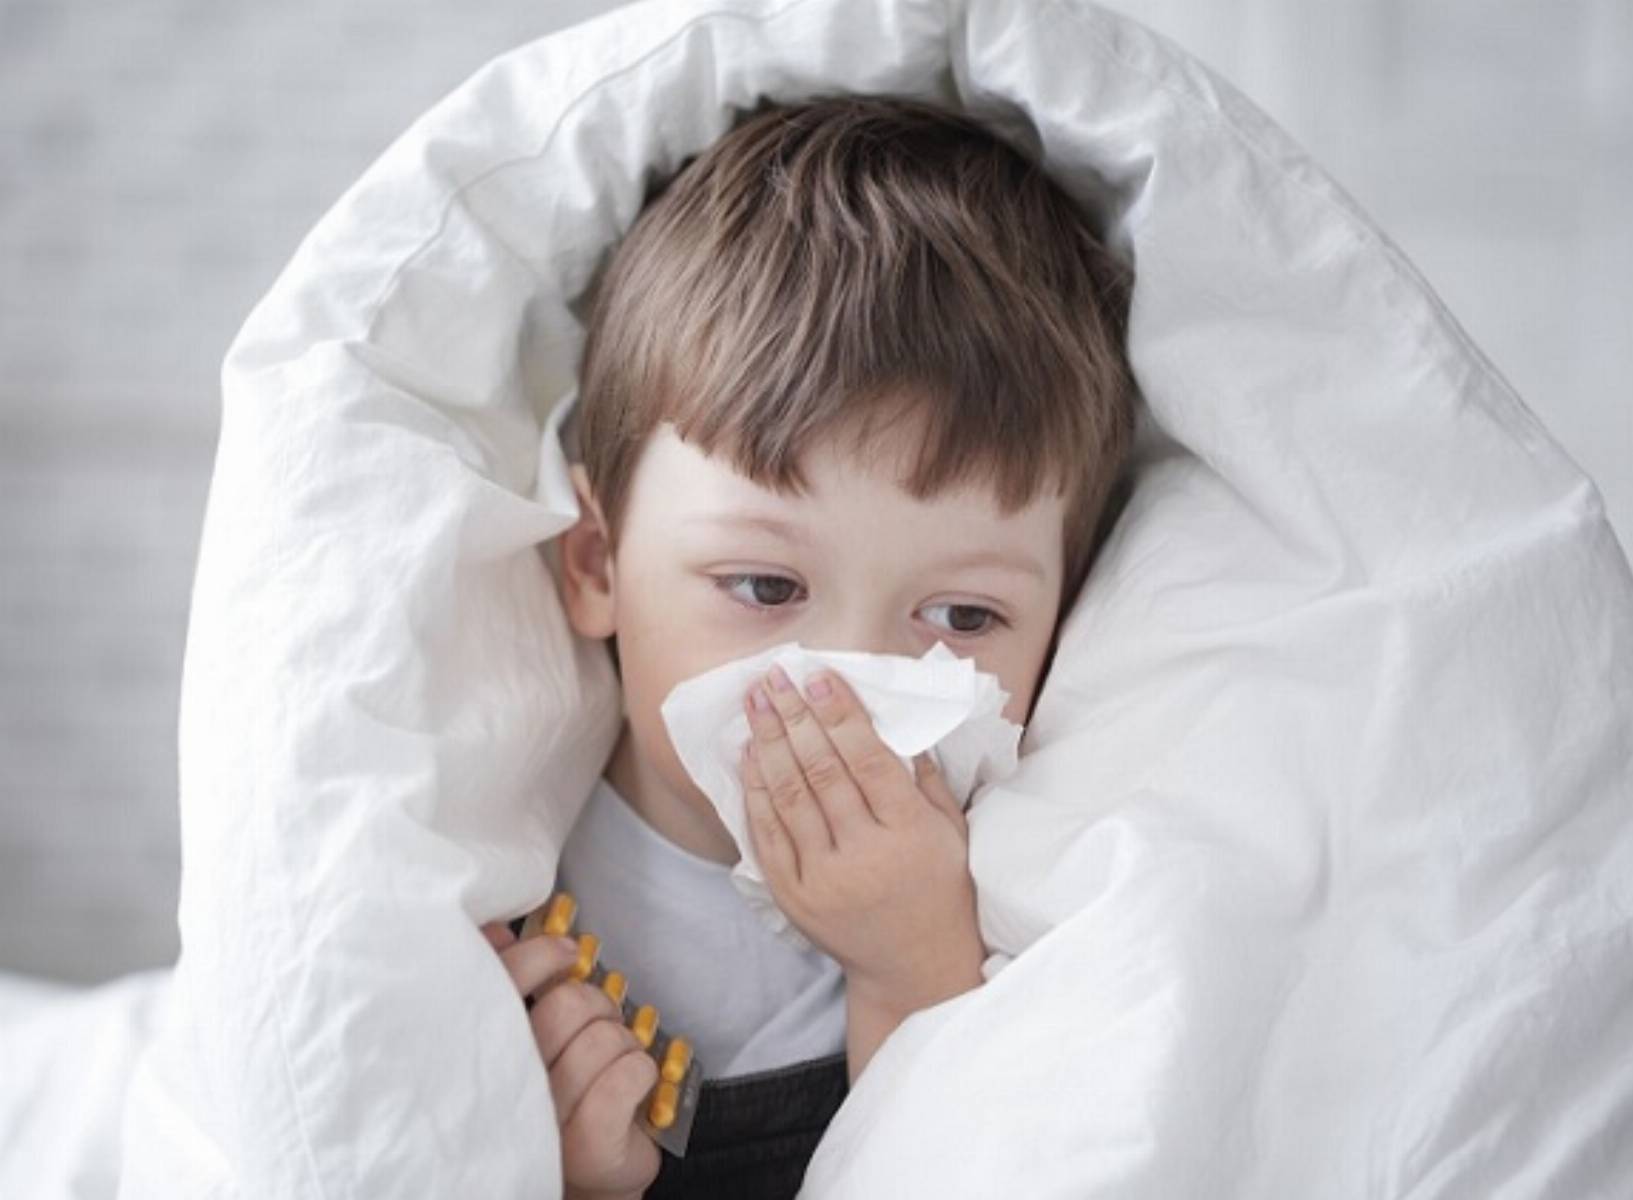 When Should A Sick Kid Stay Home Or Go To School? | HuffPost Parents